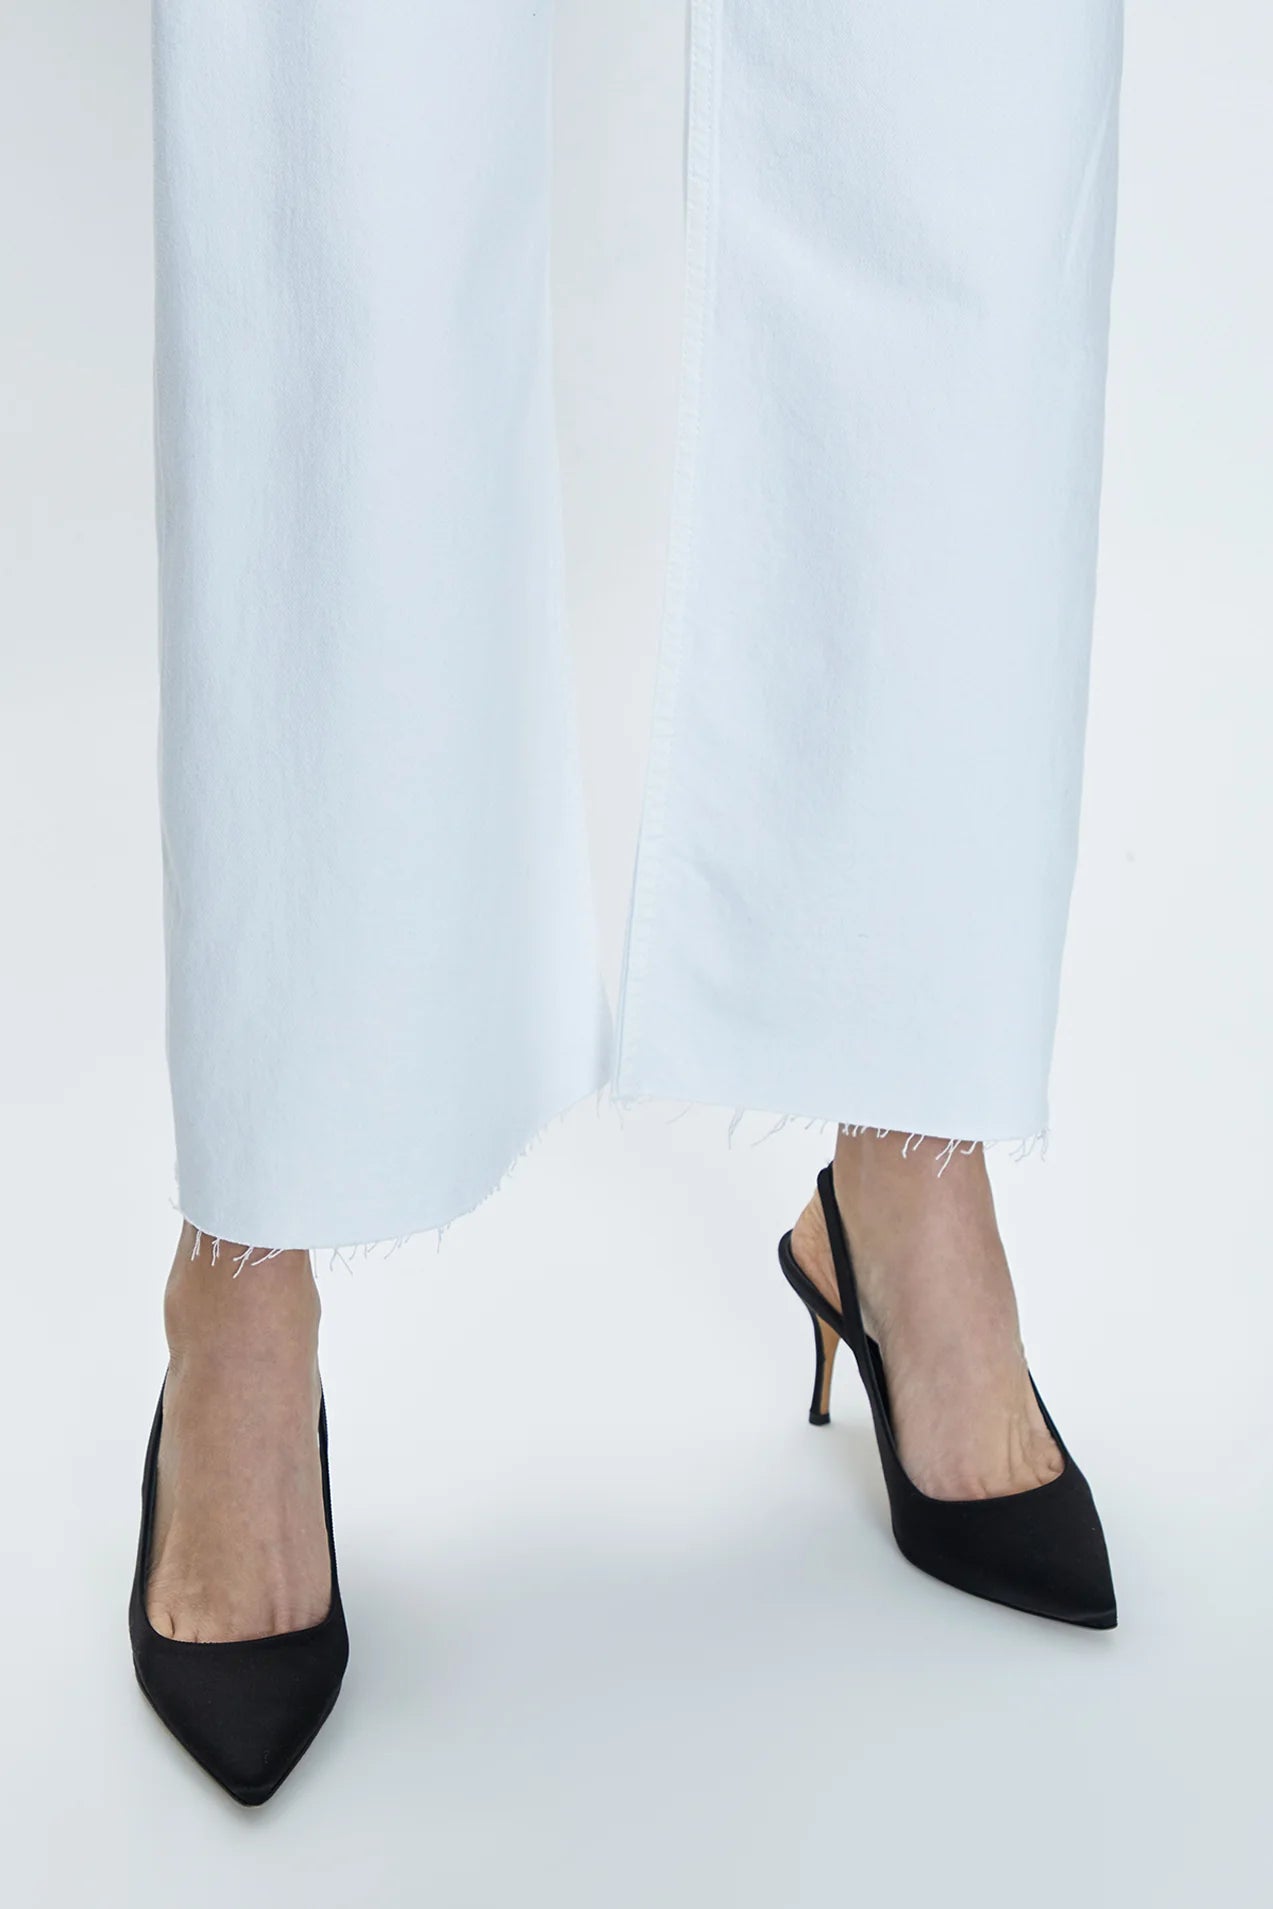 Pistol Penny High Rise Wide Leg Cropped Pant